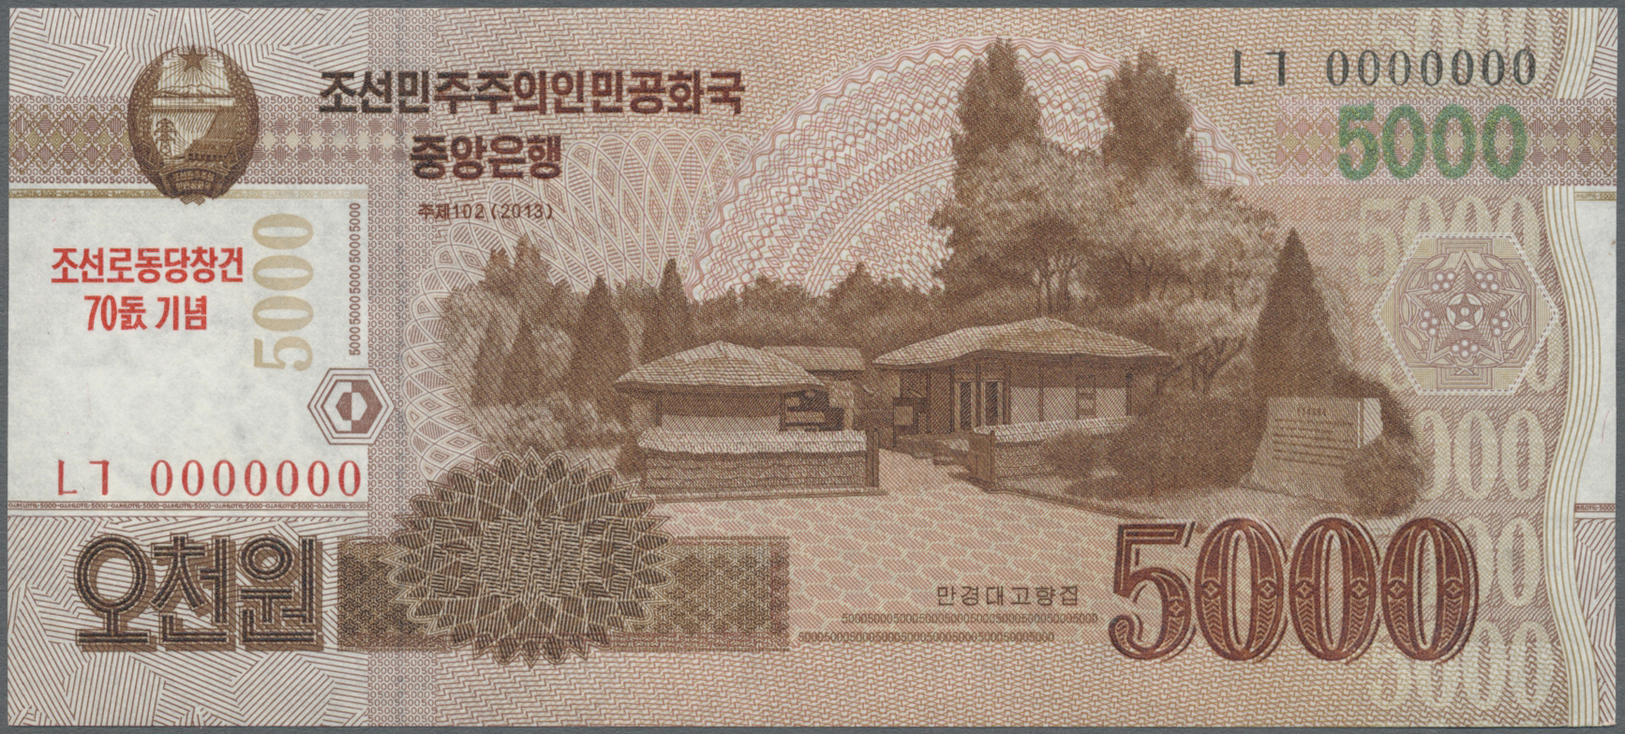 01359 Korea: Complete Bundle Of 100 Pcs 5000 Won Specimen P. New Dated 2013, Zero Serial Numbers, All In Condition: UNC. - Korea, South